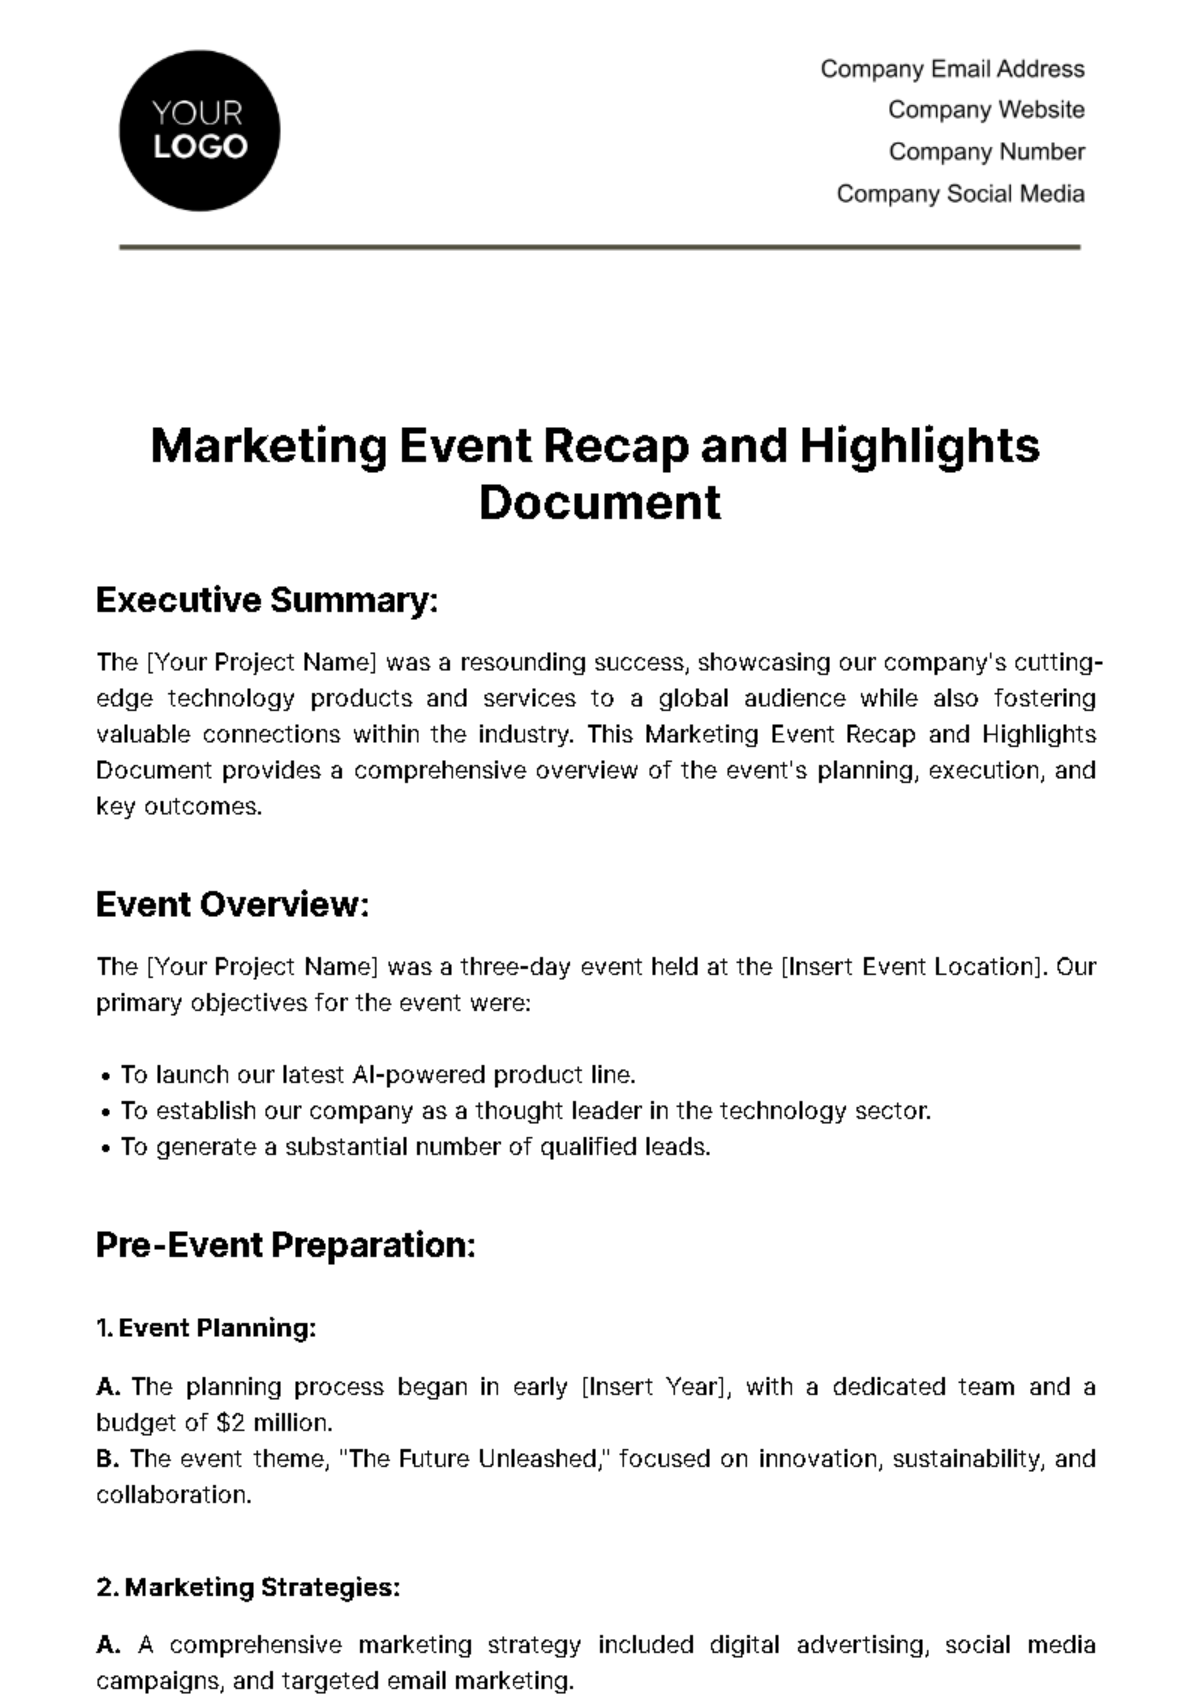 Marketing Event Recap and Highlights Document Template